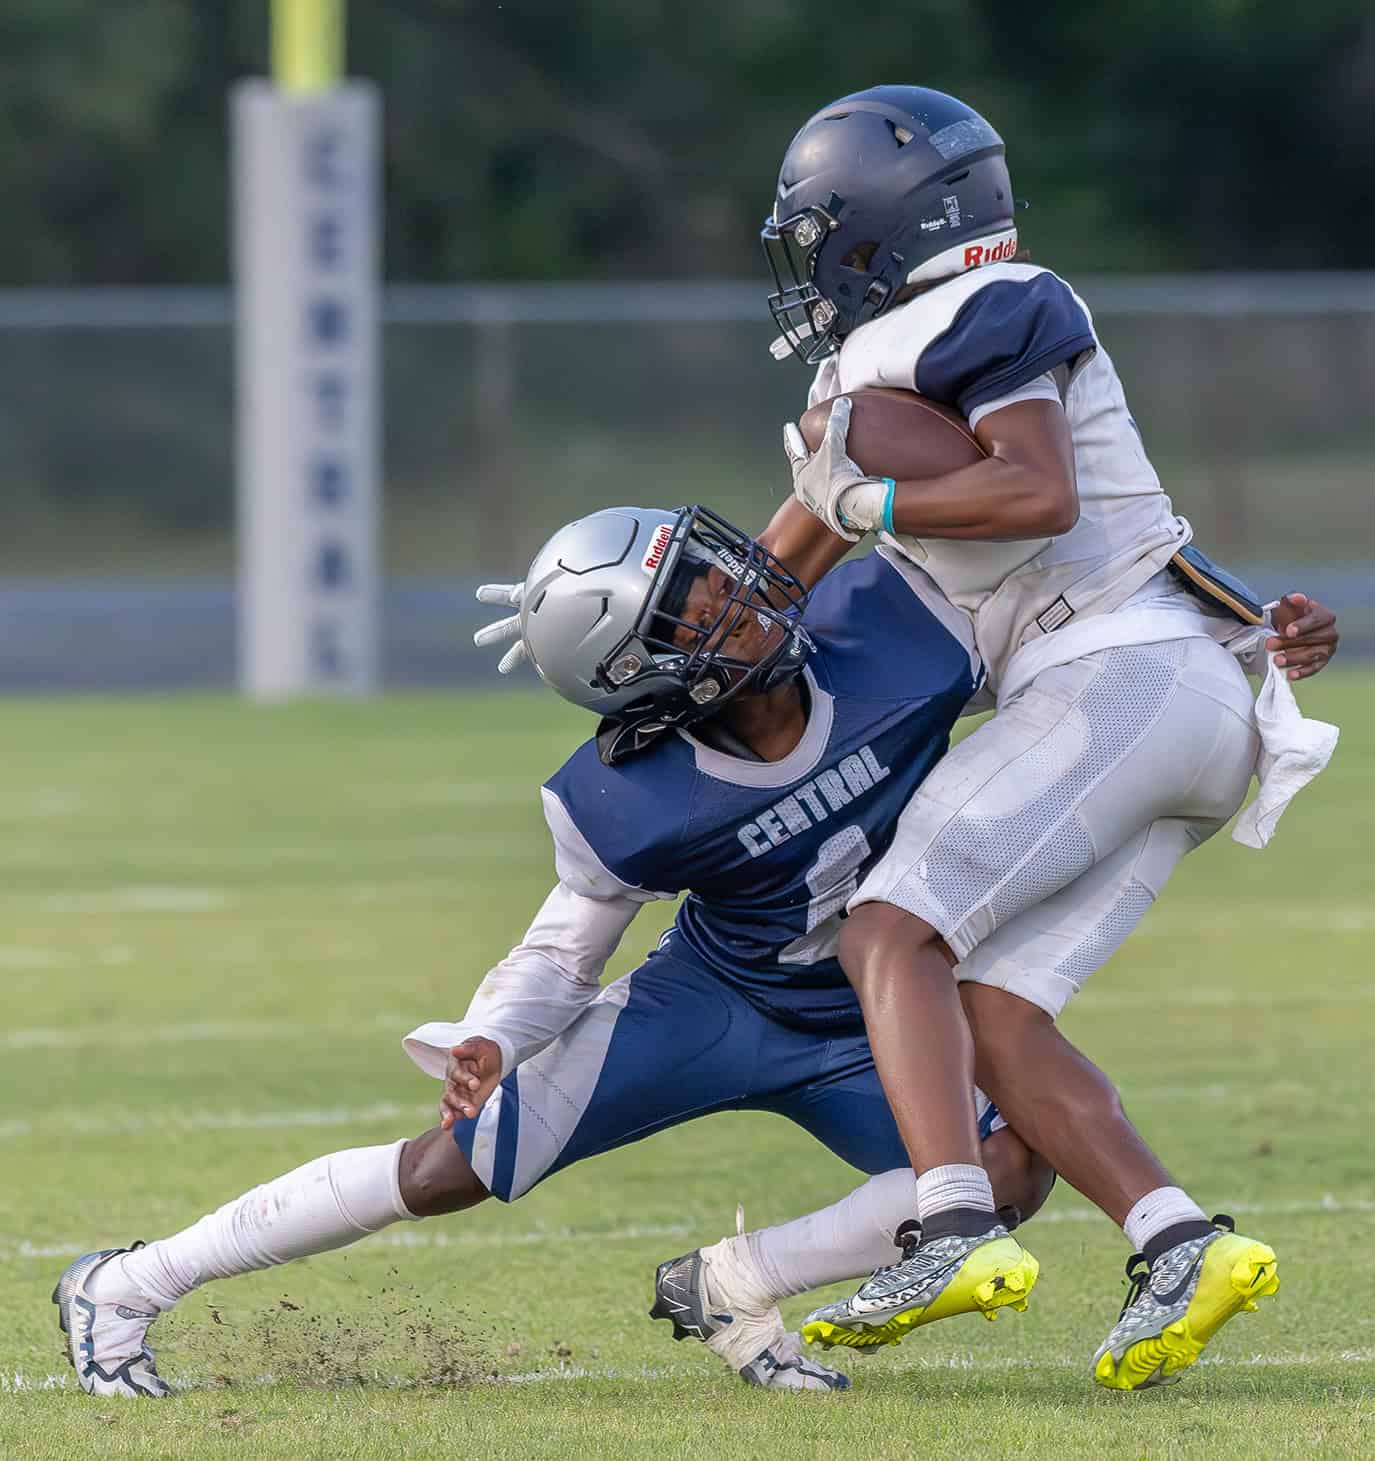 Central High’s, 1, Jacoby Graham makes an open field tackle during the game versus Wesley Chapel Friday at the Bear Den. Photo by [Joseph DiCristofalo]